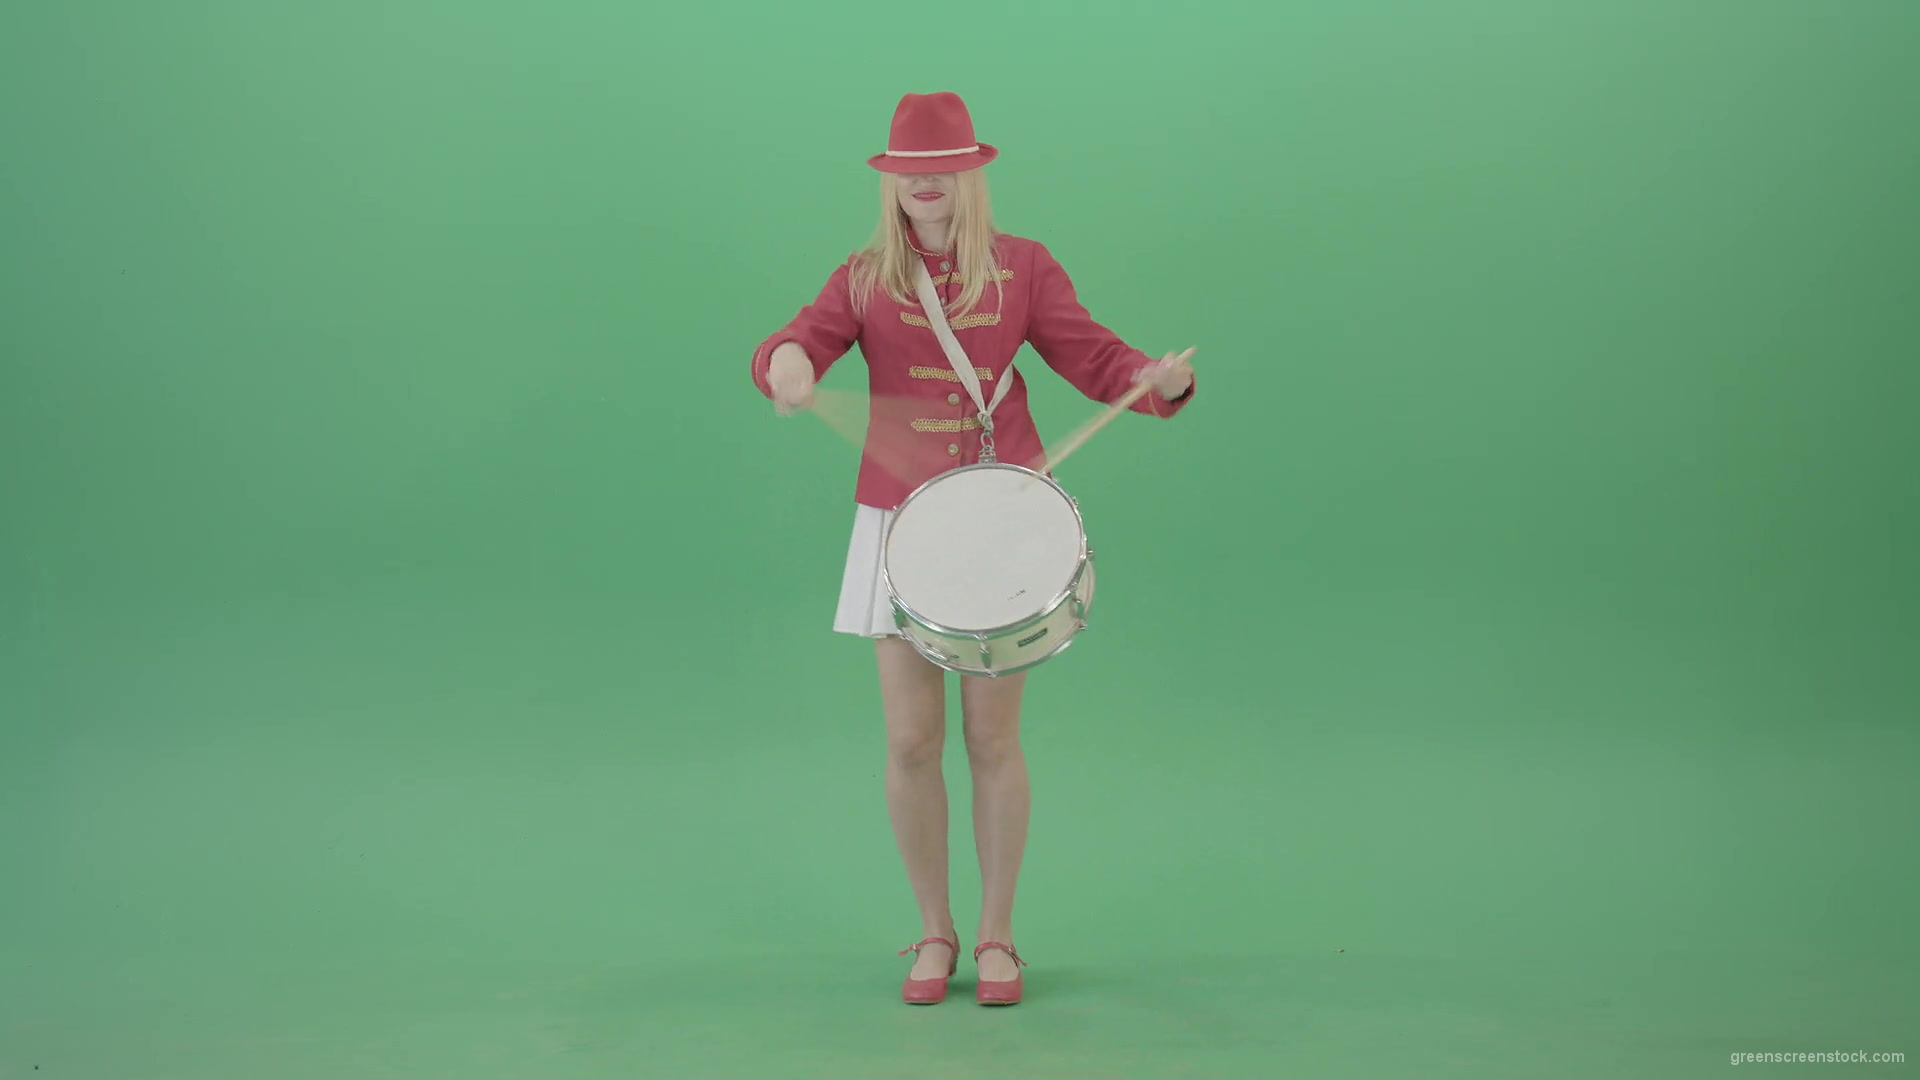 Blonde-Girl-playing-snare-drum-fast-and-marching-on-green-screen-4K-Video-Footage-1920_007 Green Screen Stock